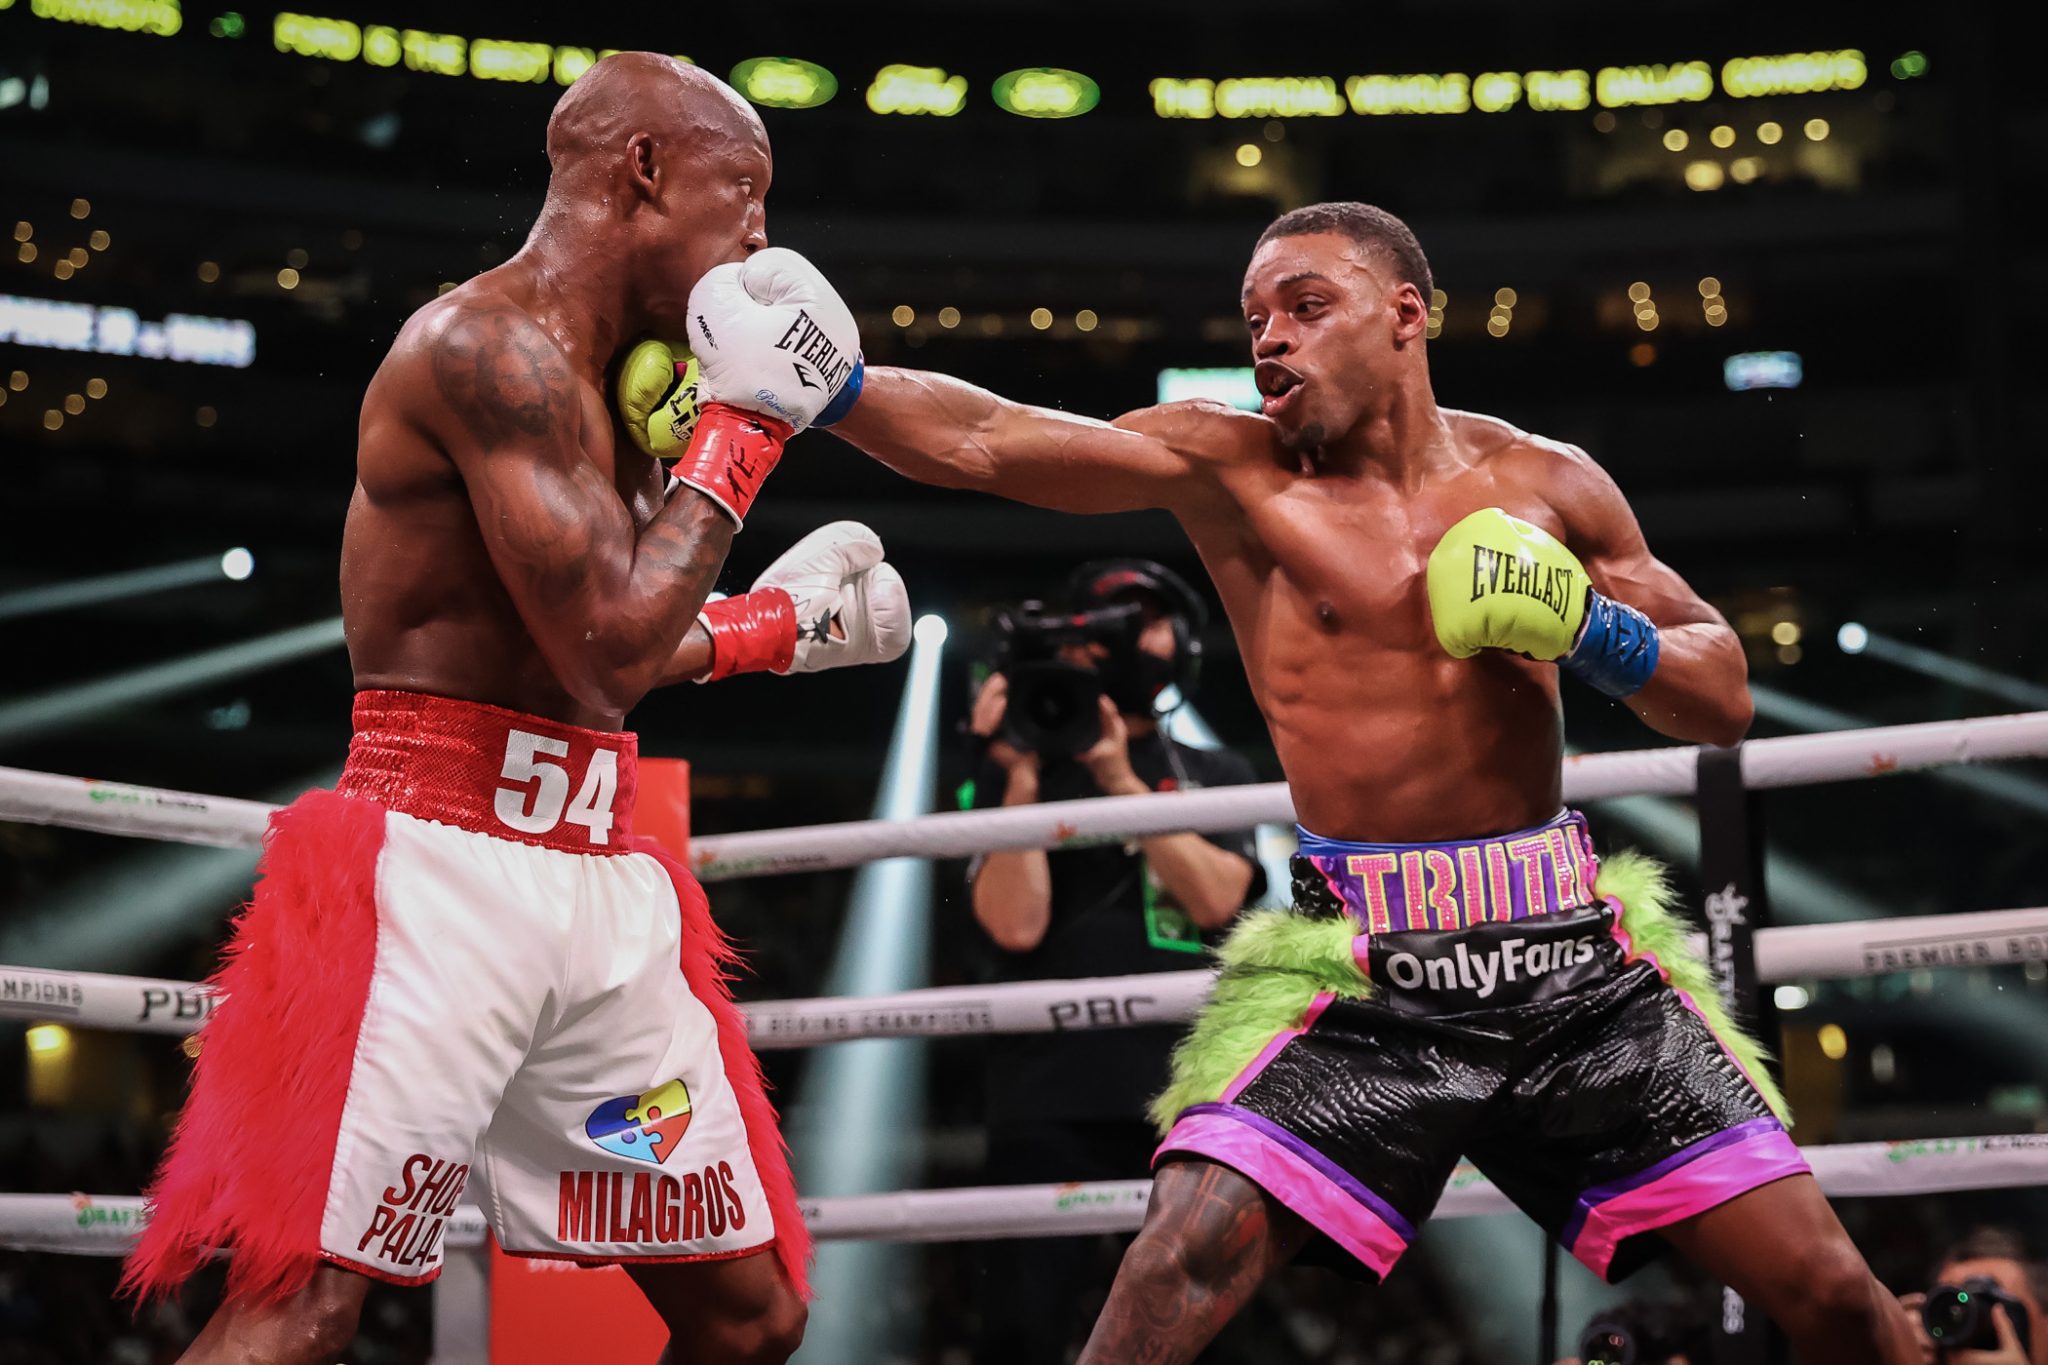 Sources: The Errol Spence Jr.-Terence Crawford superfight appears set for J...